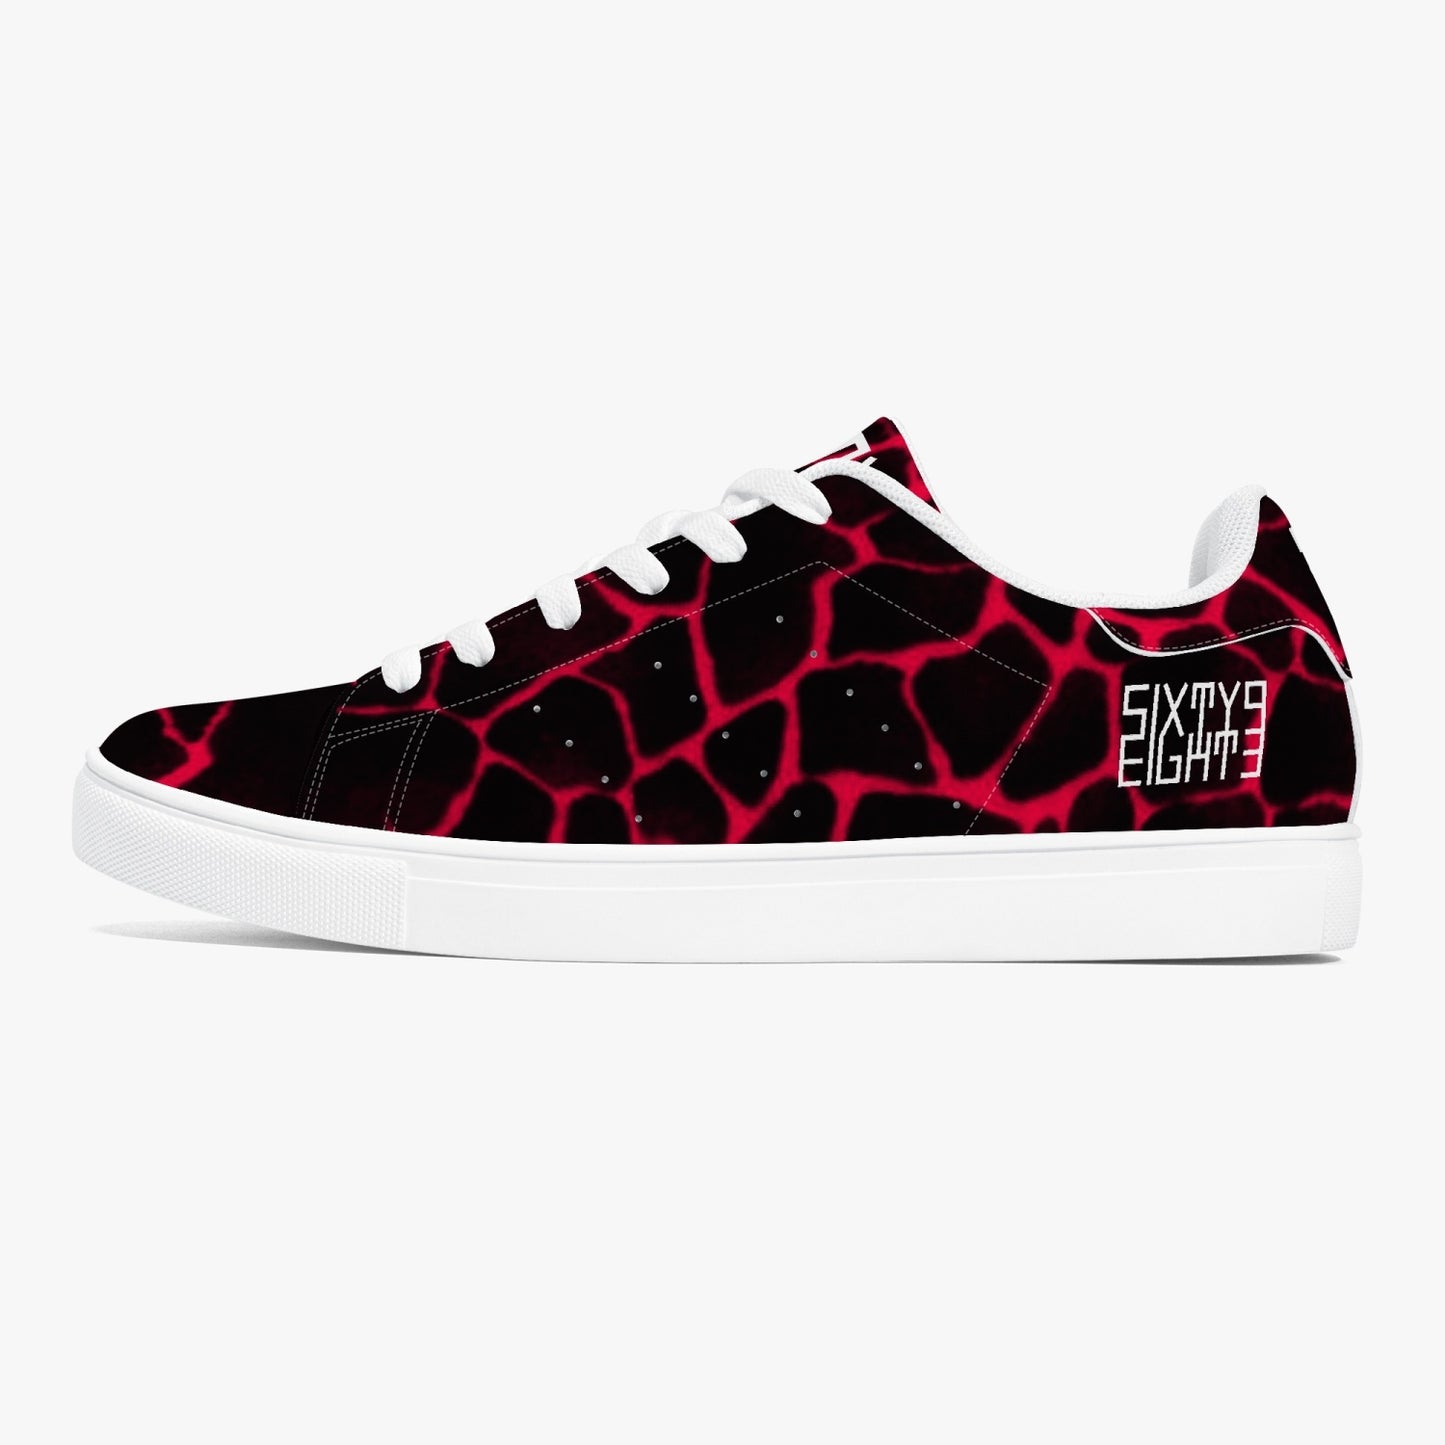 Sixty Eight 93 Logo White Boa Red & Black Classic Low-Top Leather Shoes